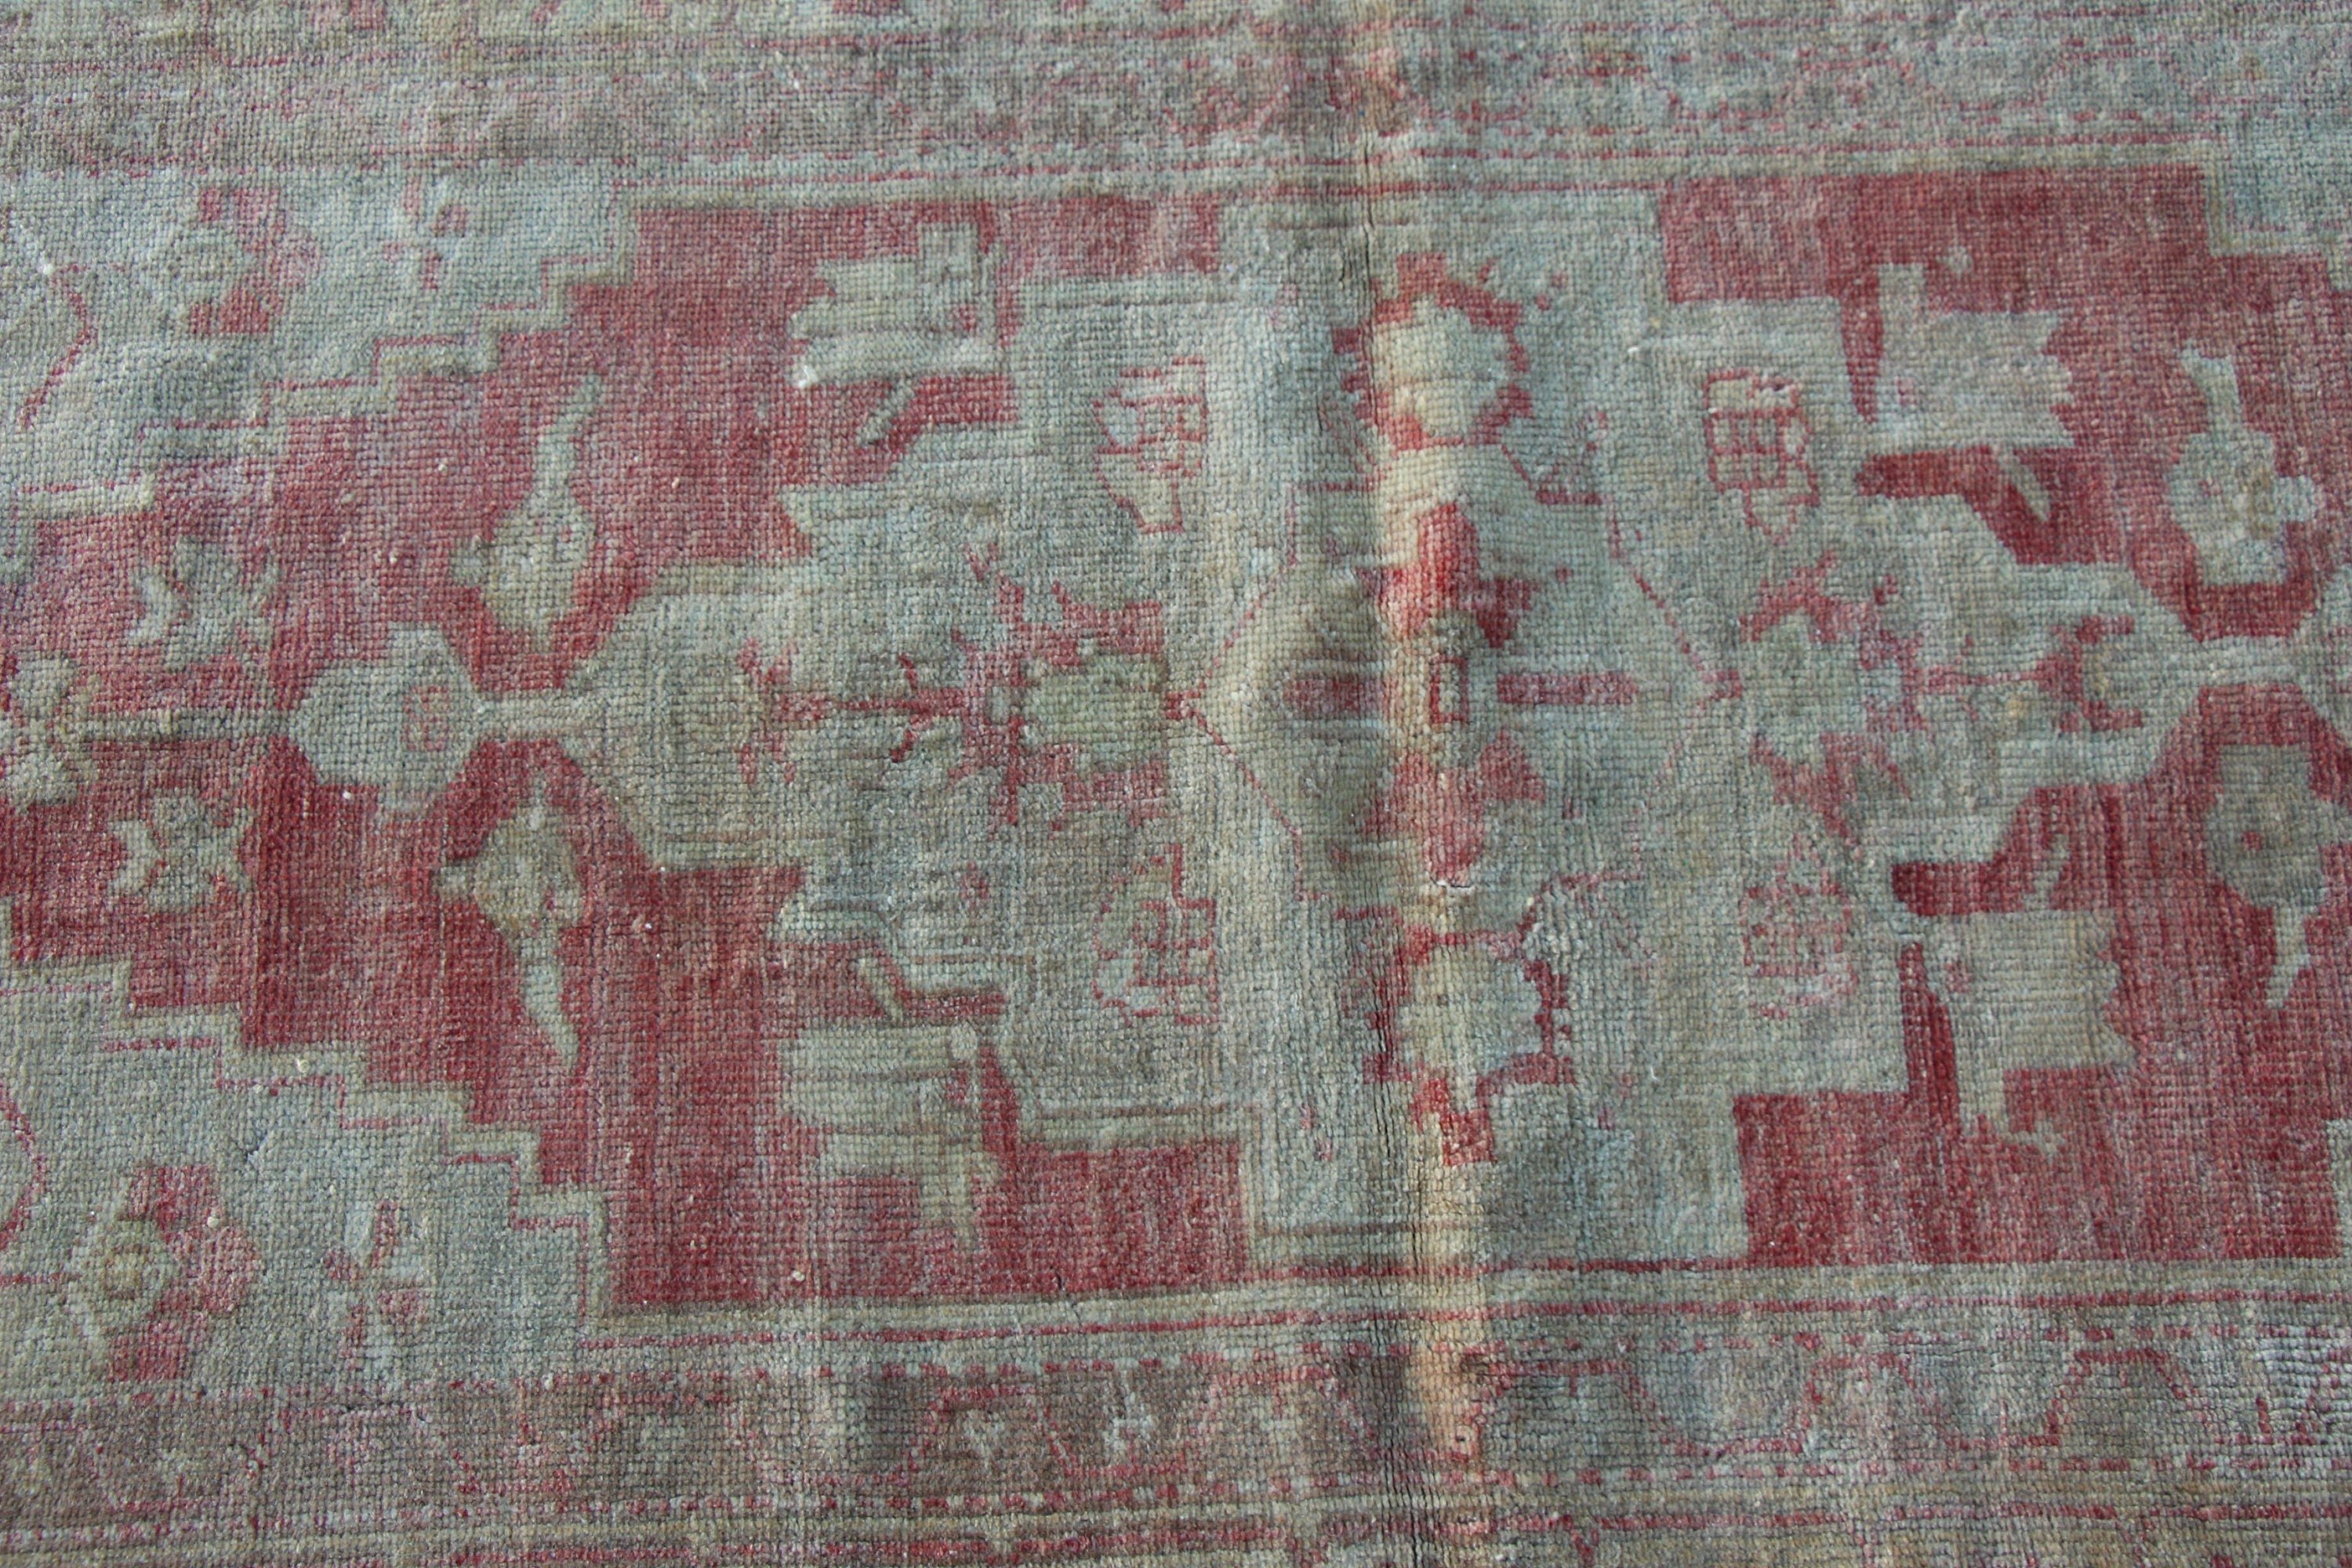 Rugs for Entry, Bedroom Rugs, Pink Wool Rugs, Turkish Rug, Cool Rugs, Vintage Decor Rug, 2.8x6.4 ft Accent Rug, Entry Rugs, Vintage Rug